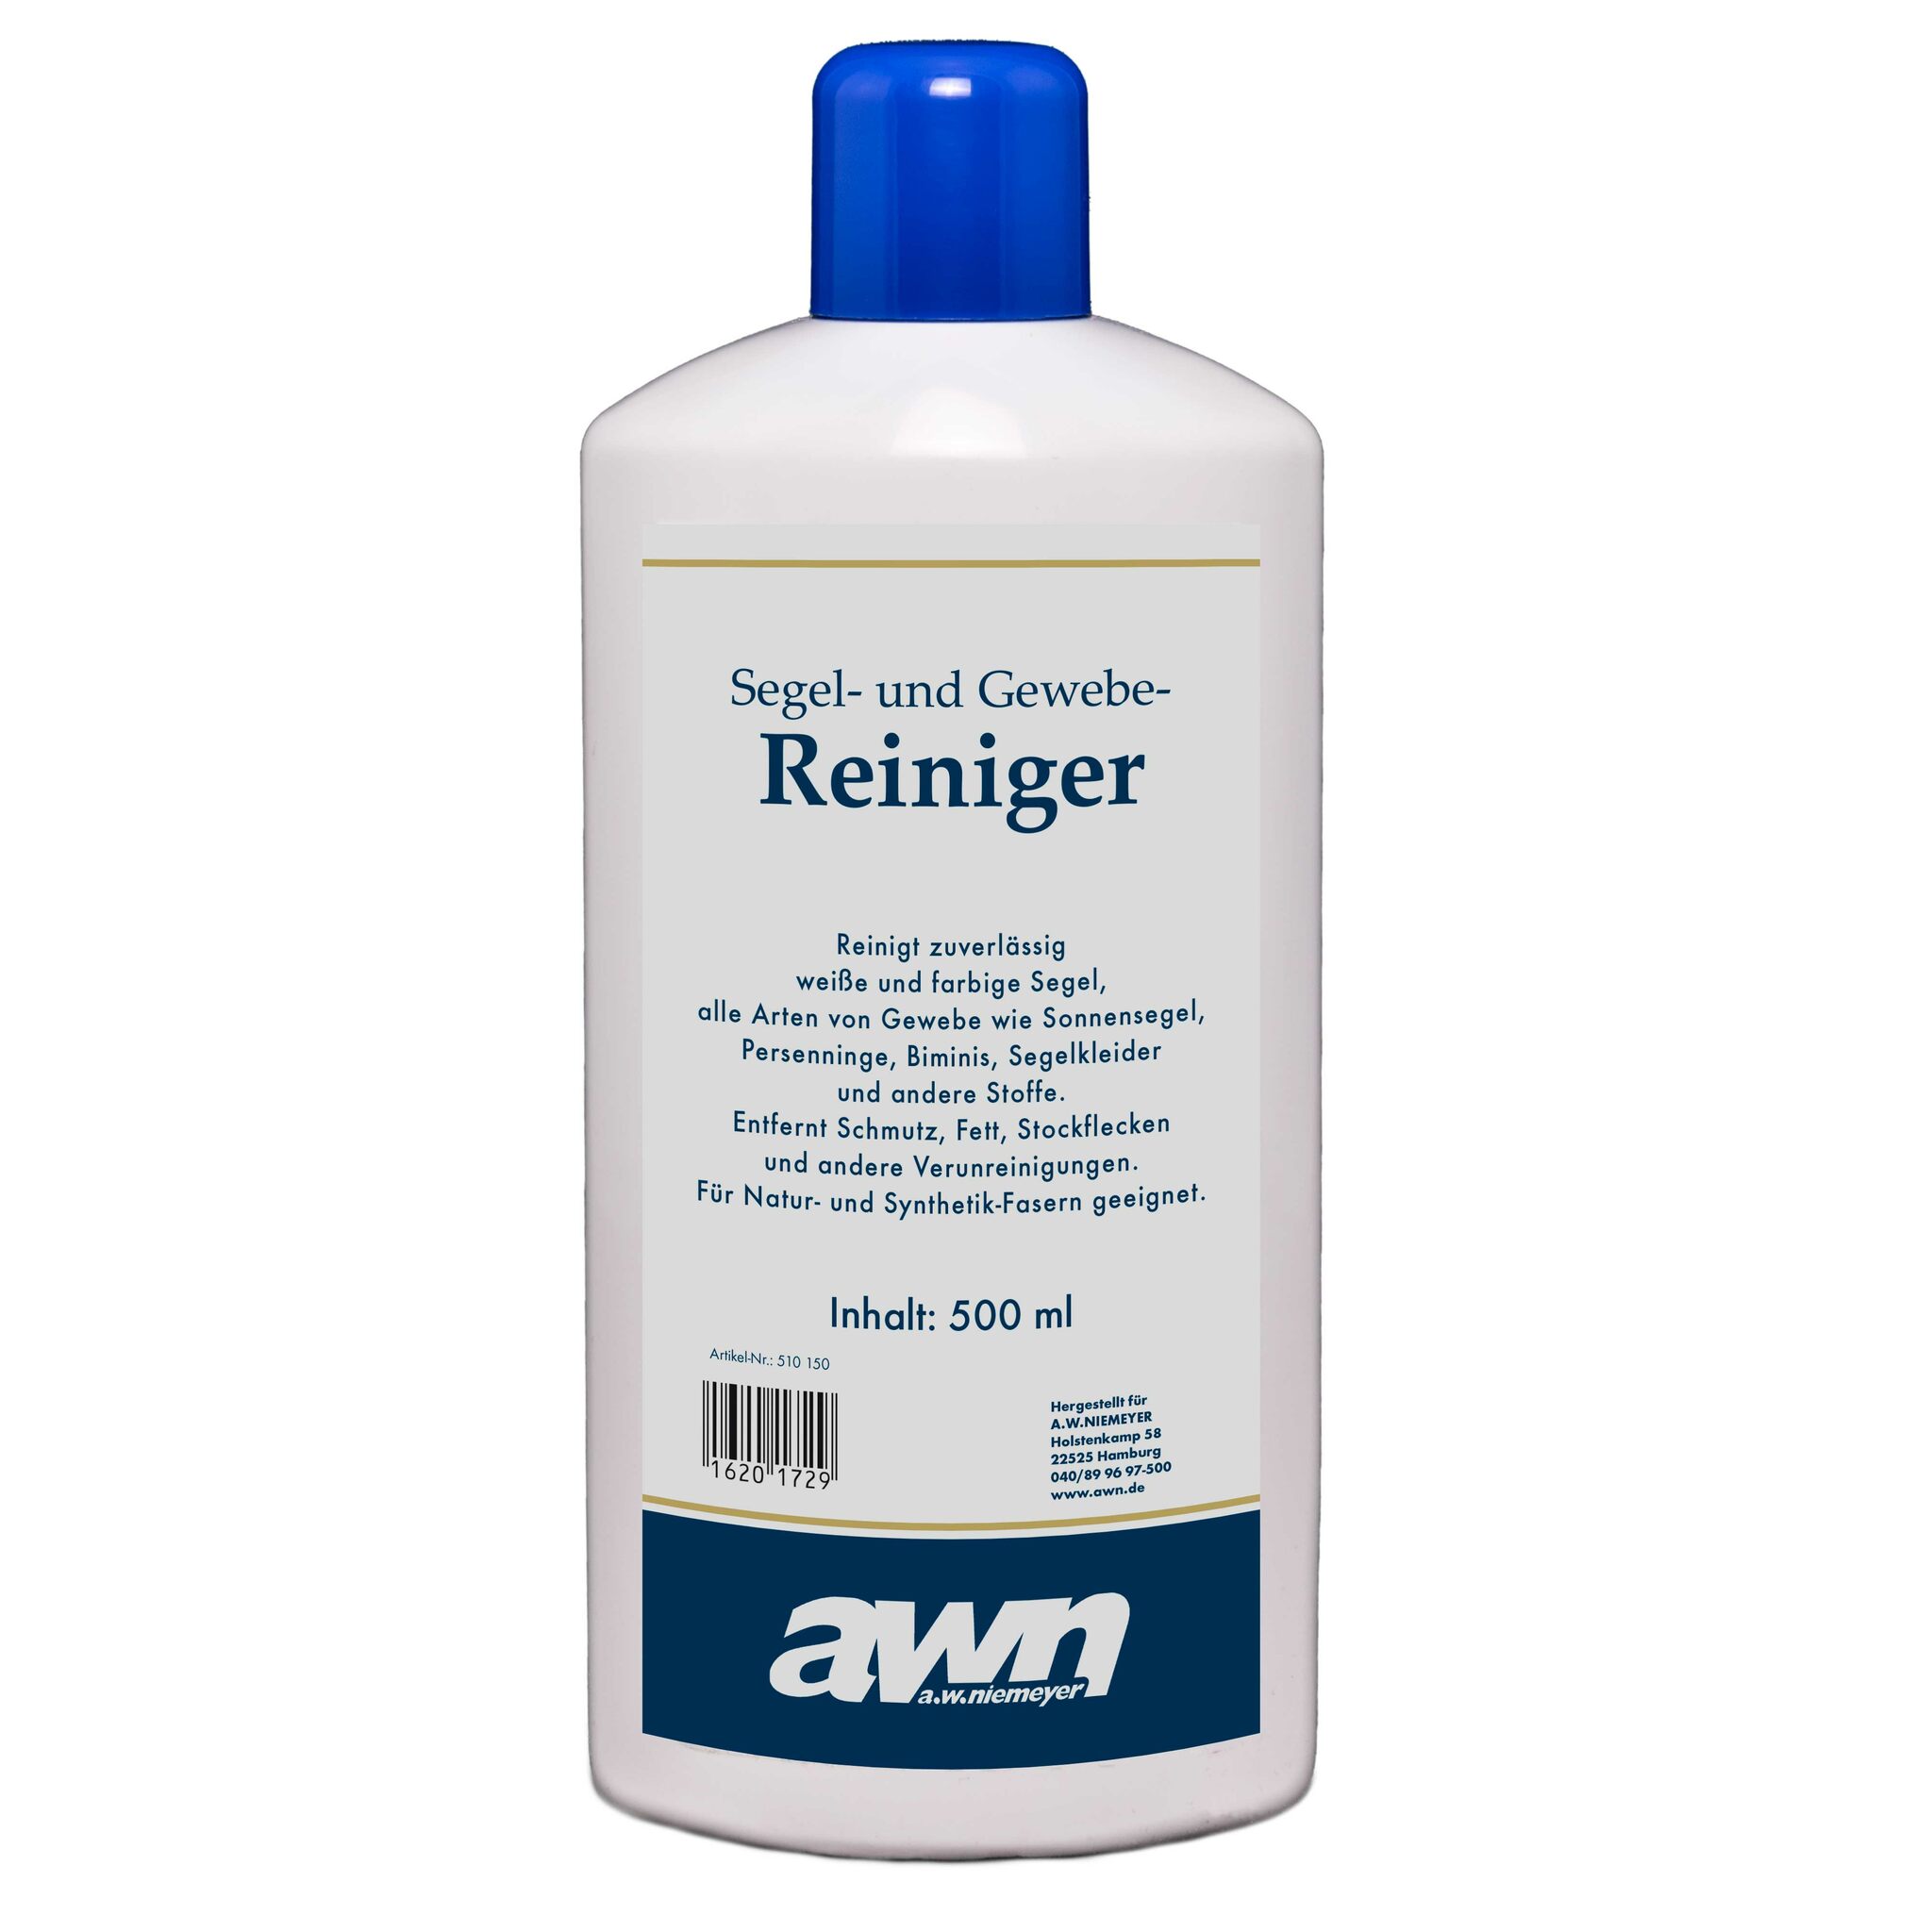 awn Sail and fabric cleaner